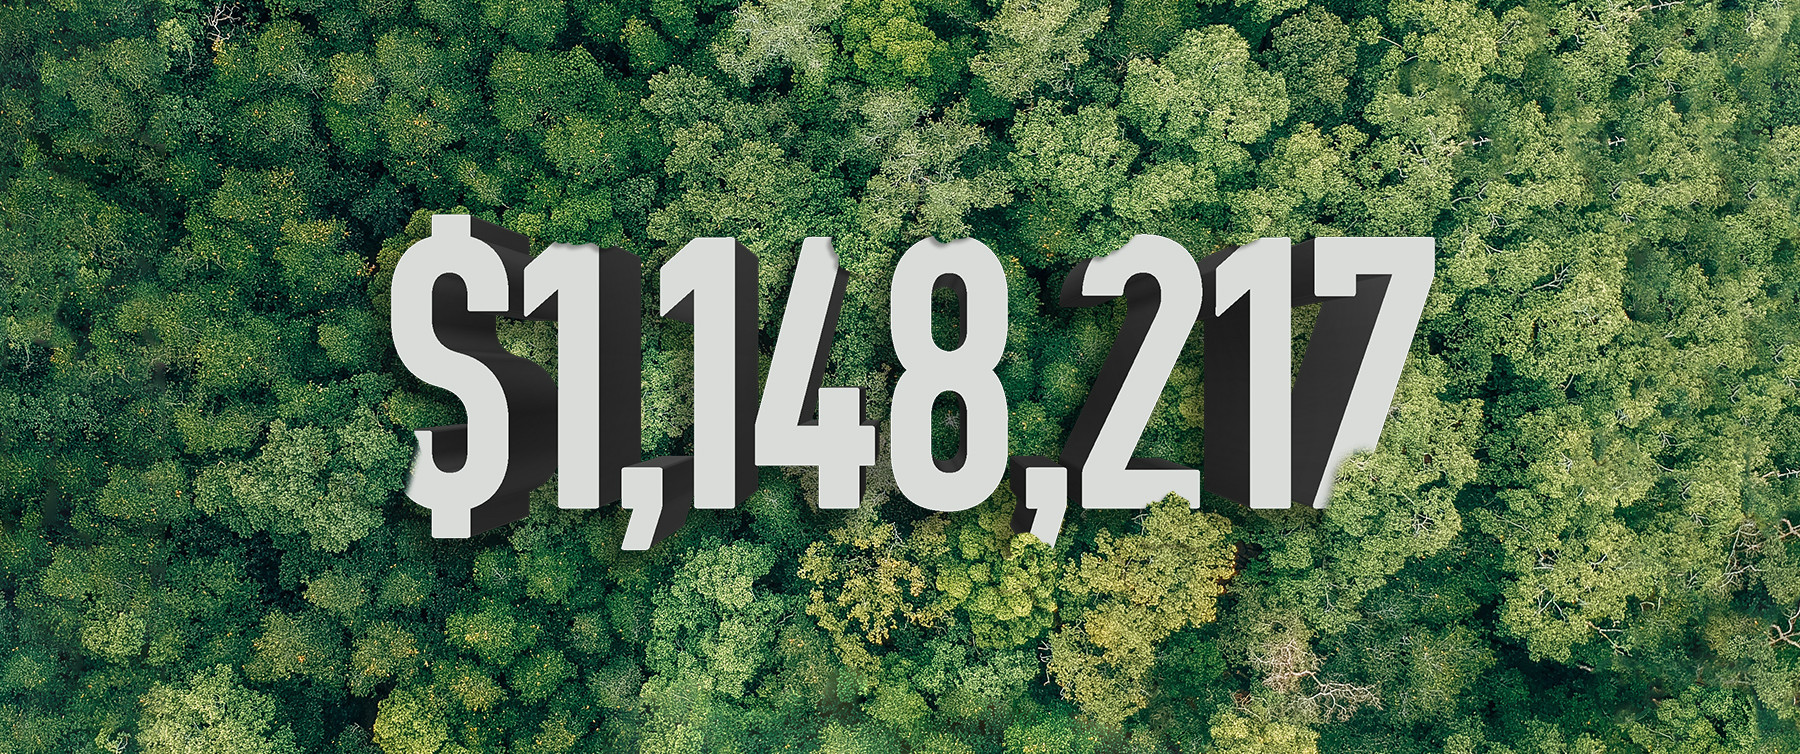 Large, white numbers reading $1,148,217 are photoshopped to look like they're nestled in the canopy of trees